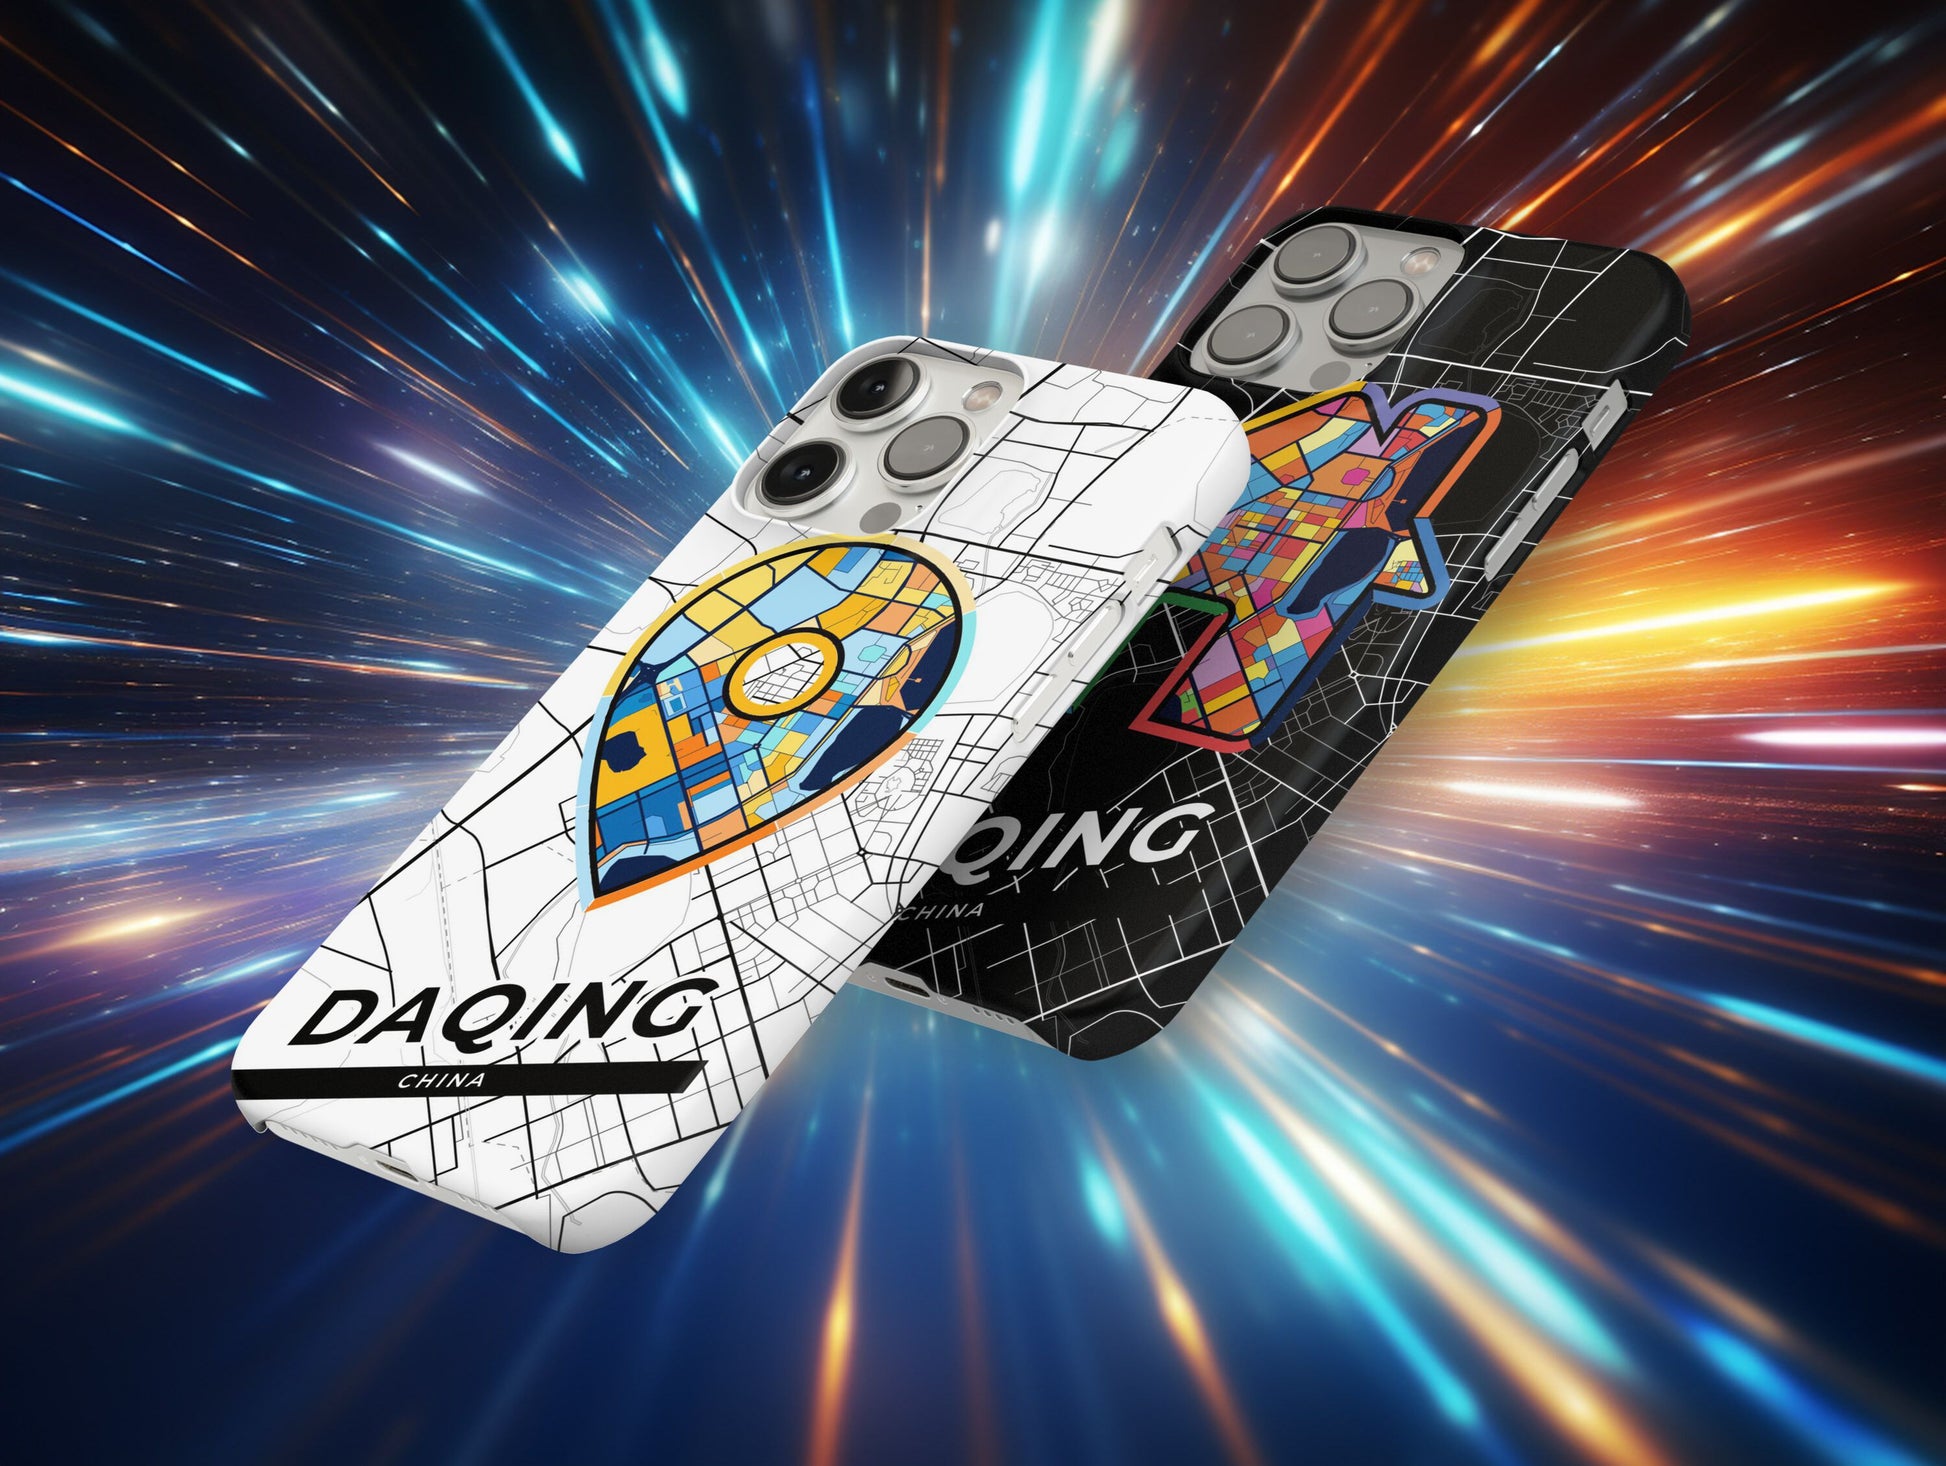 Daqing China slim phone case with colorful icon. Birthday, wedding or housewarming gift. Couple match cases.